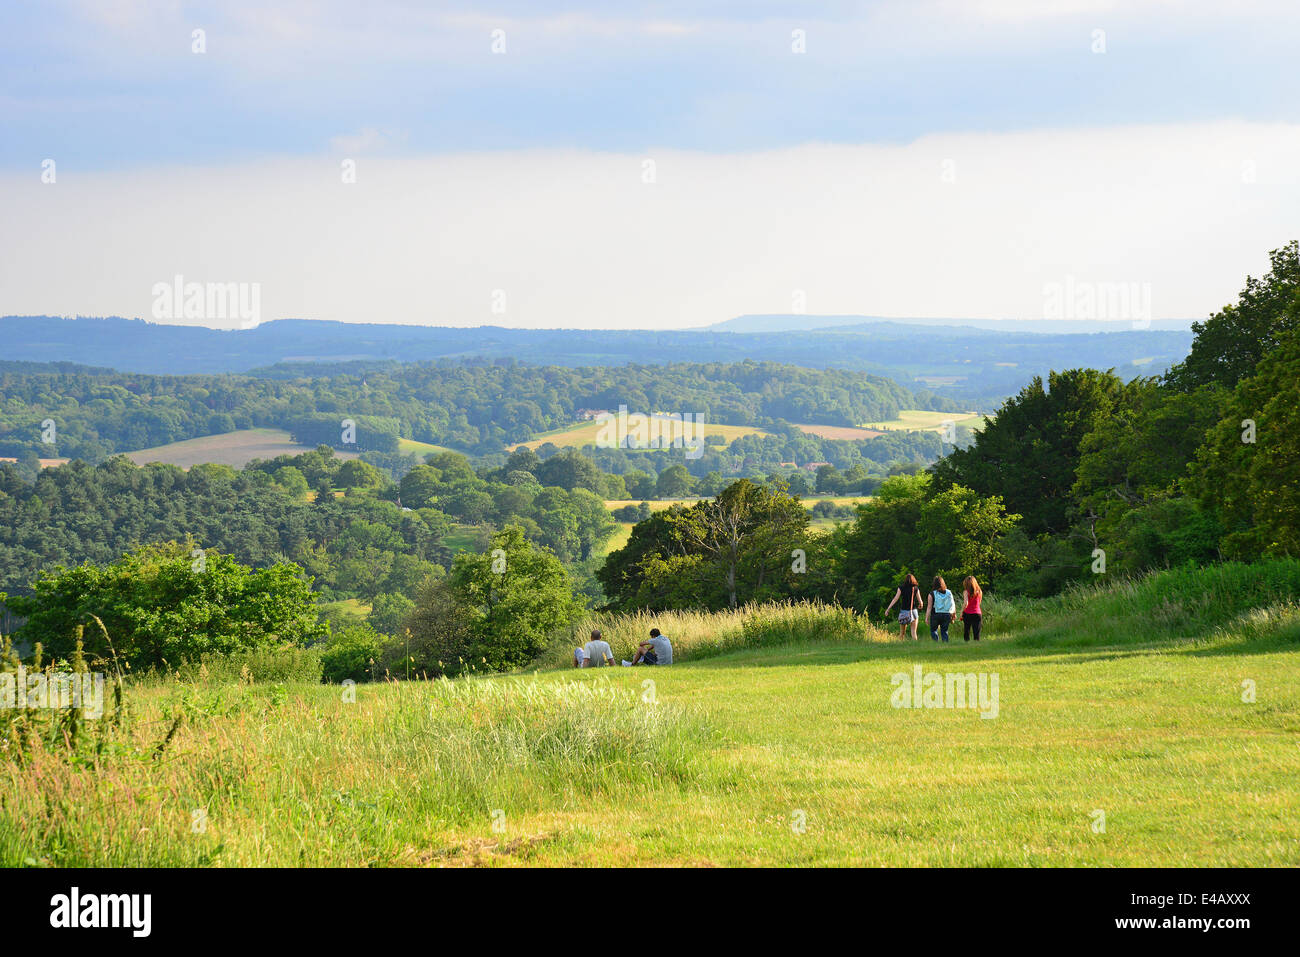 Newlands Corner natural beauty spot on Albury Downs, North Downs, near Guildford, Surrey, England, United Kingdom Stock Photo